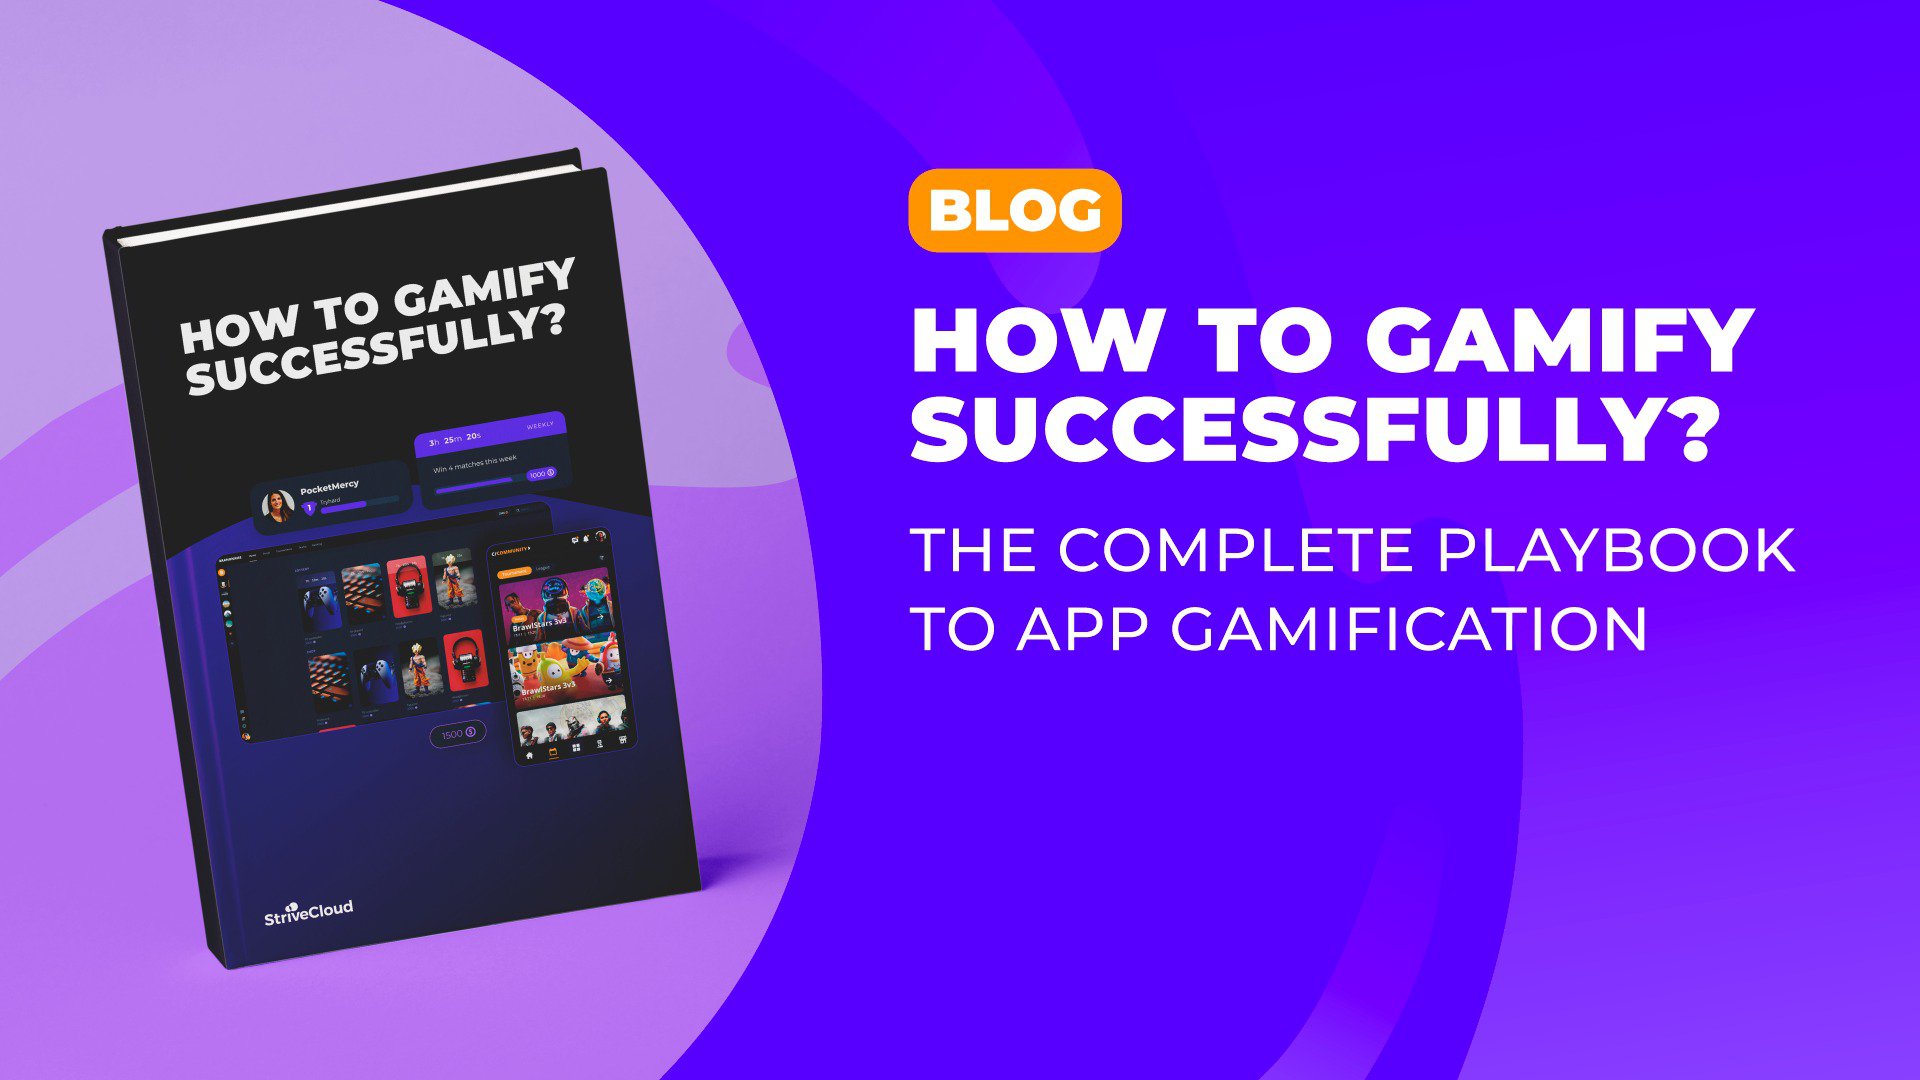 How do you gamify successfully? The complete playbook to app gamification cover